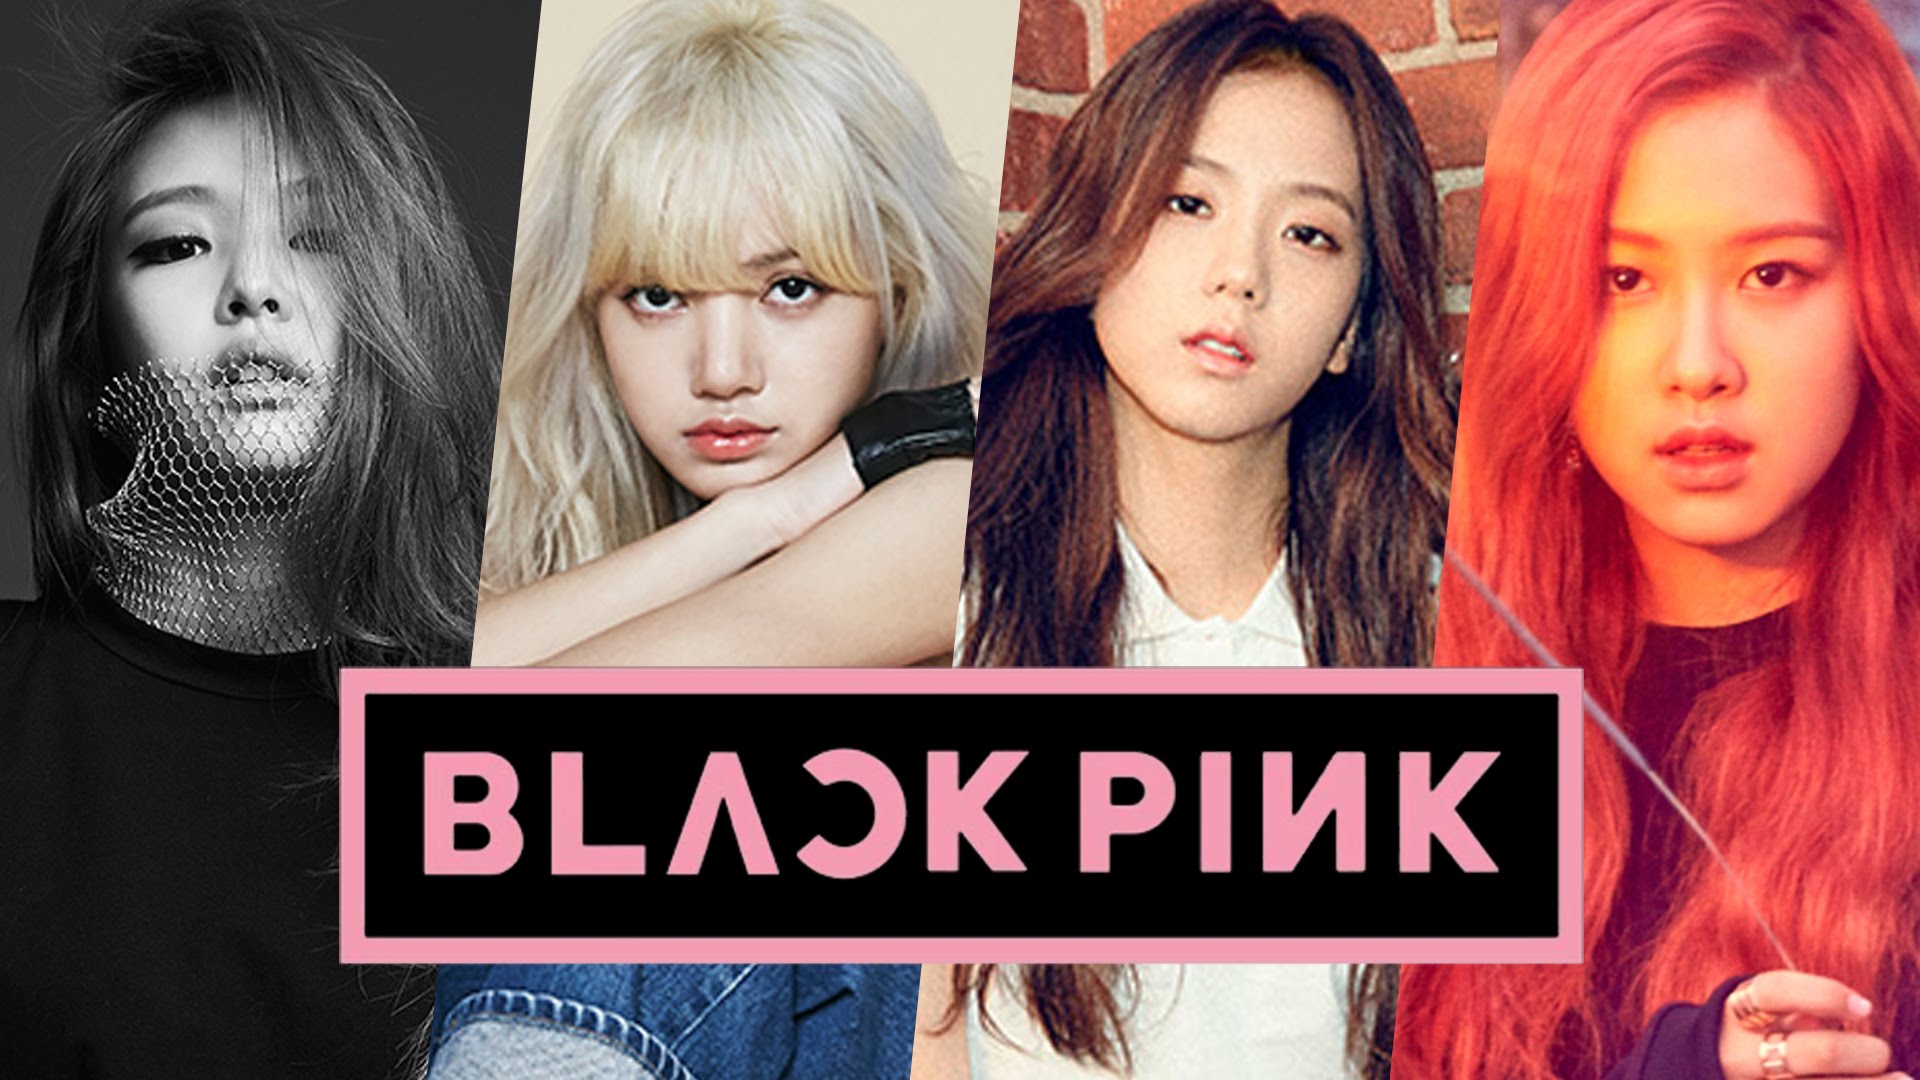 Black Pink images BLACKPINK HD wallpaper and background photos